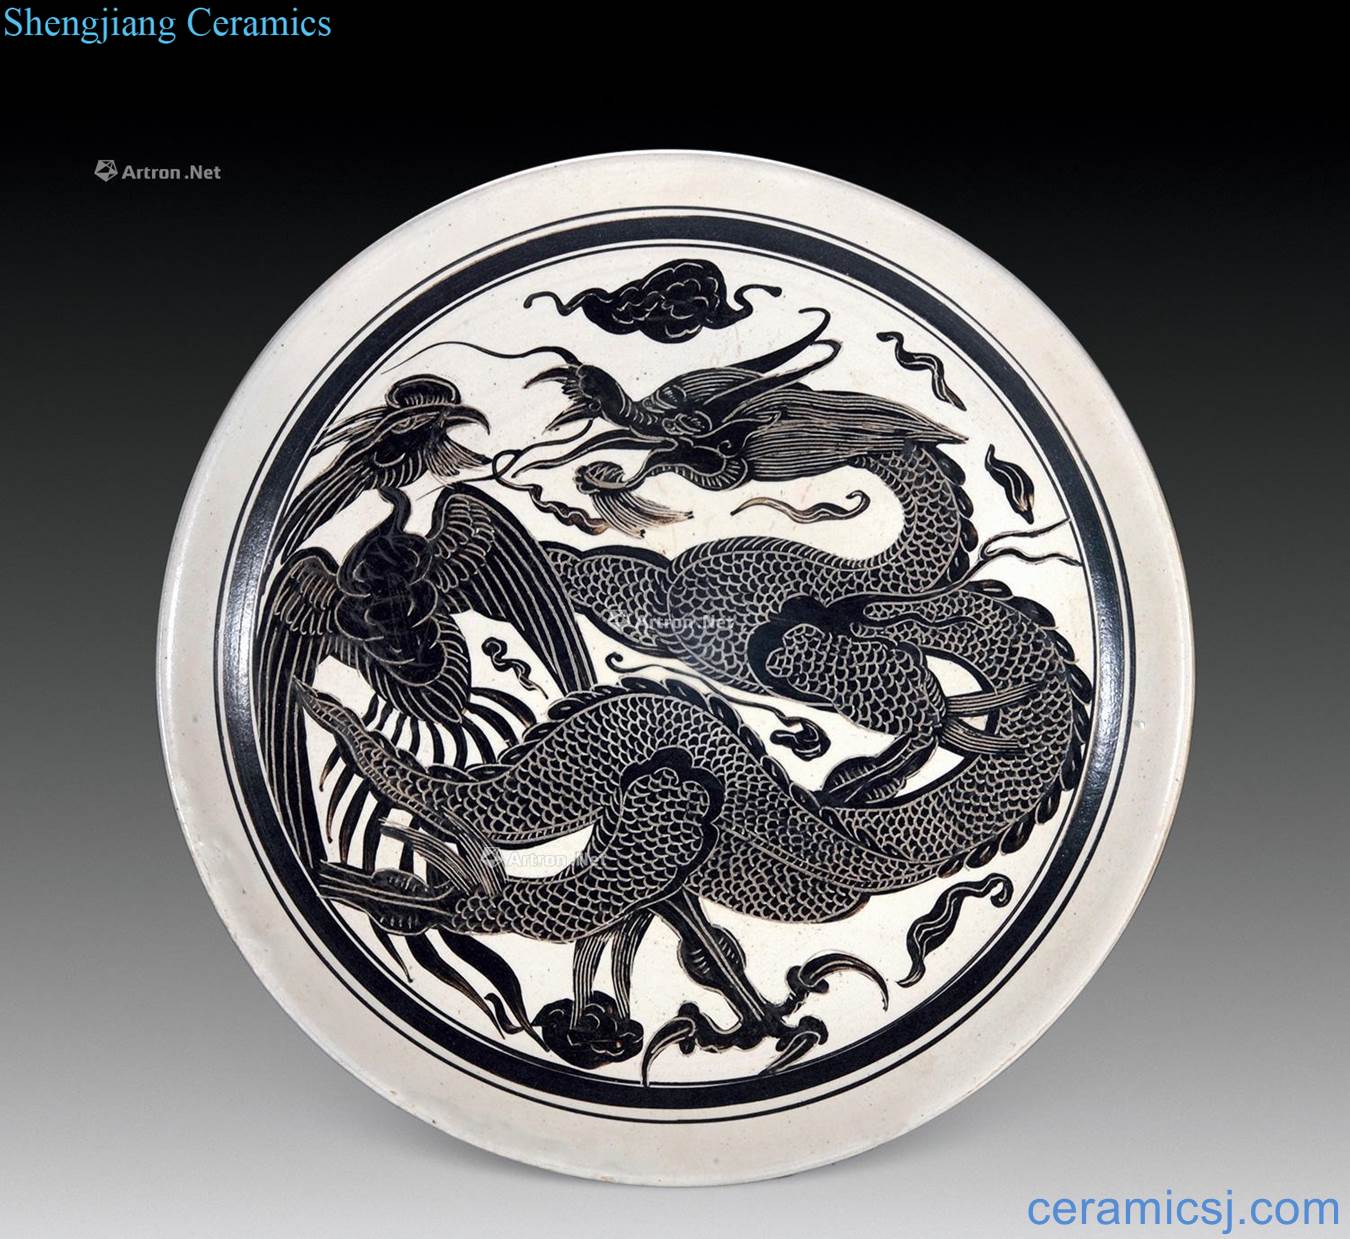 Song magnetic state kiln dragon pattern plate